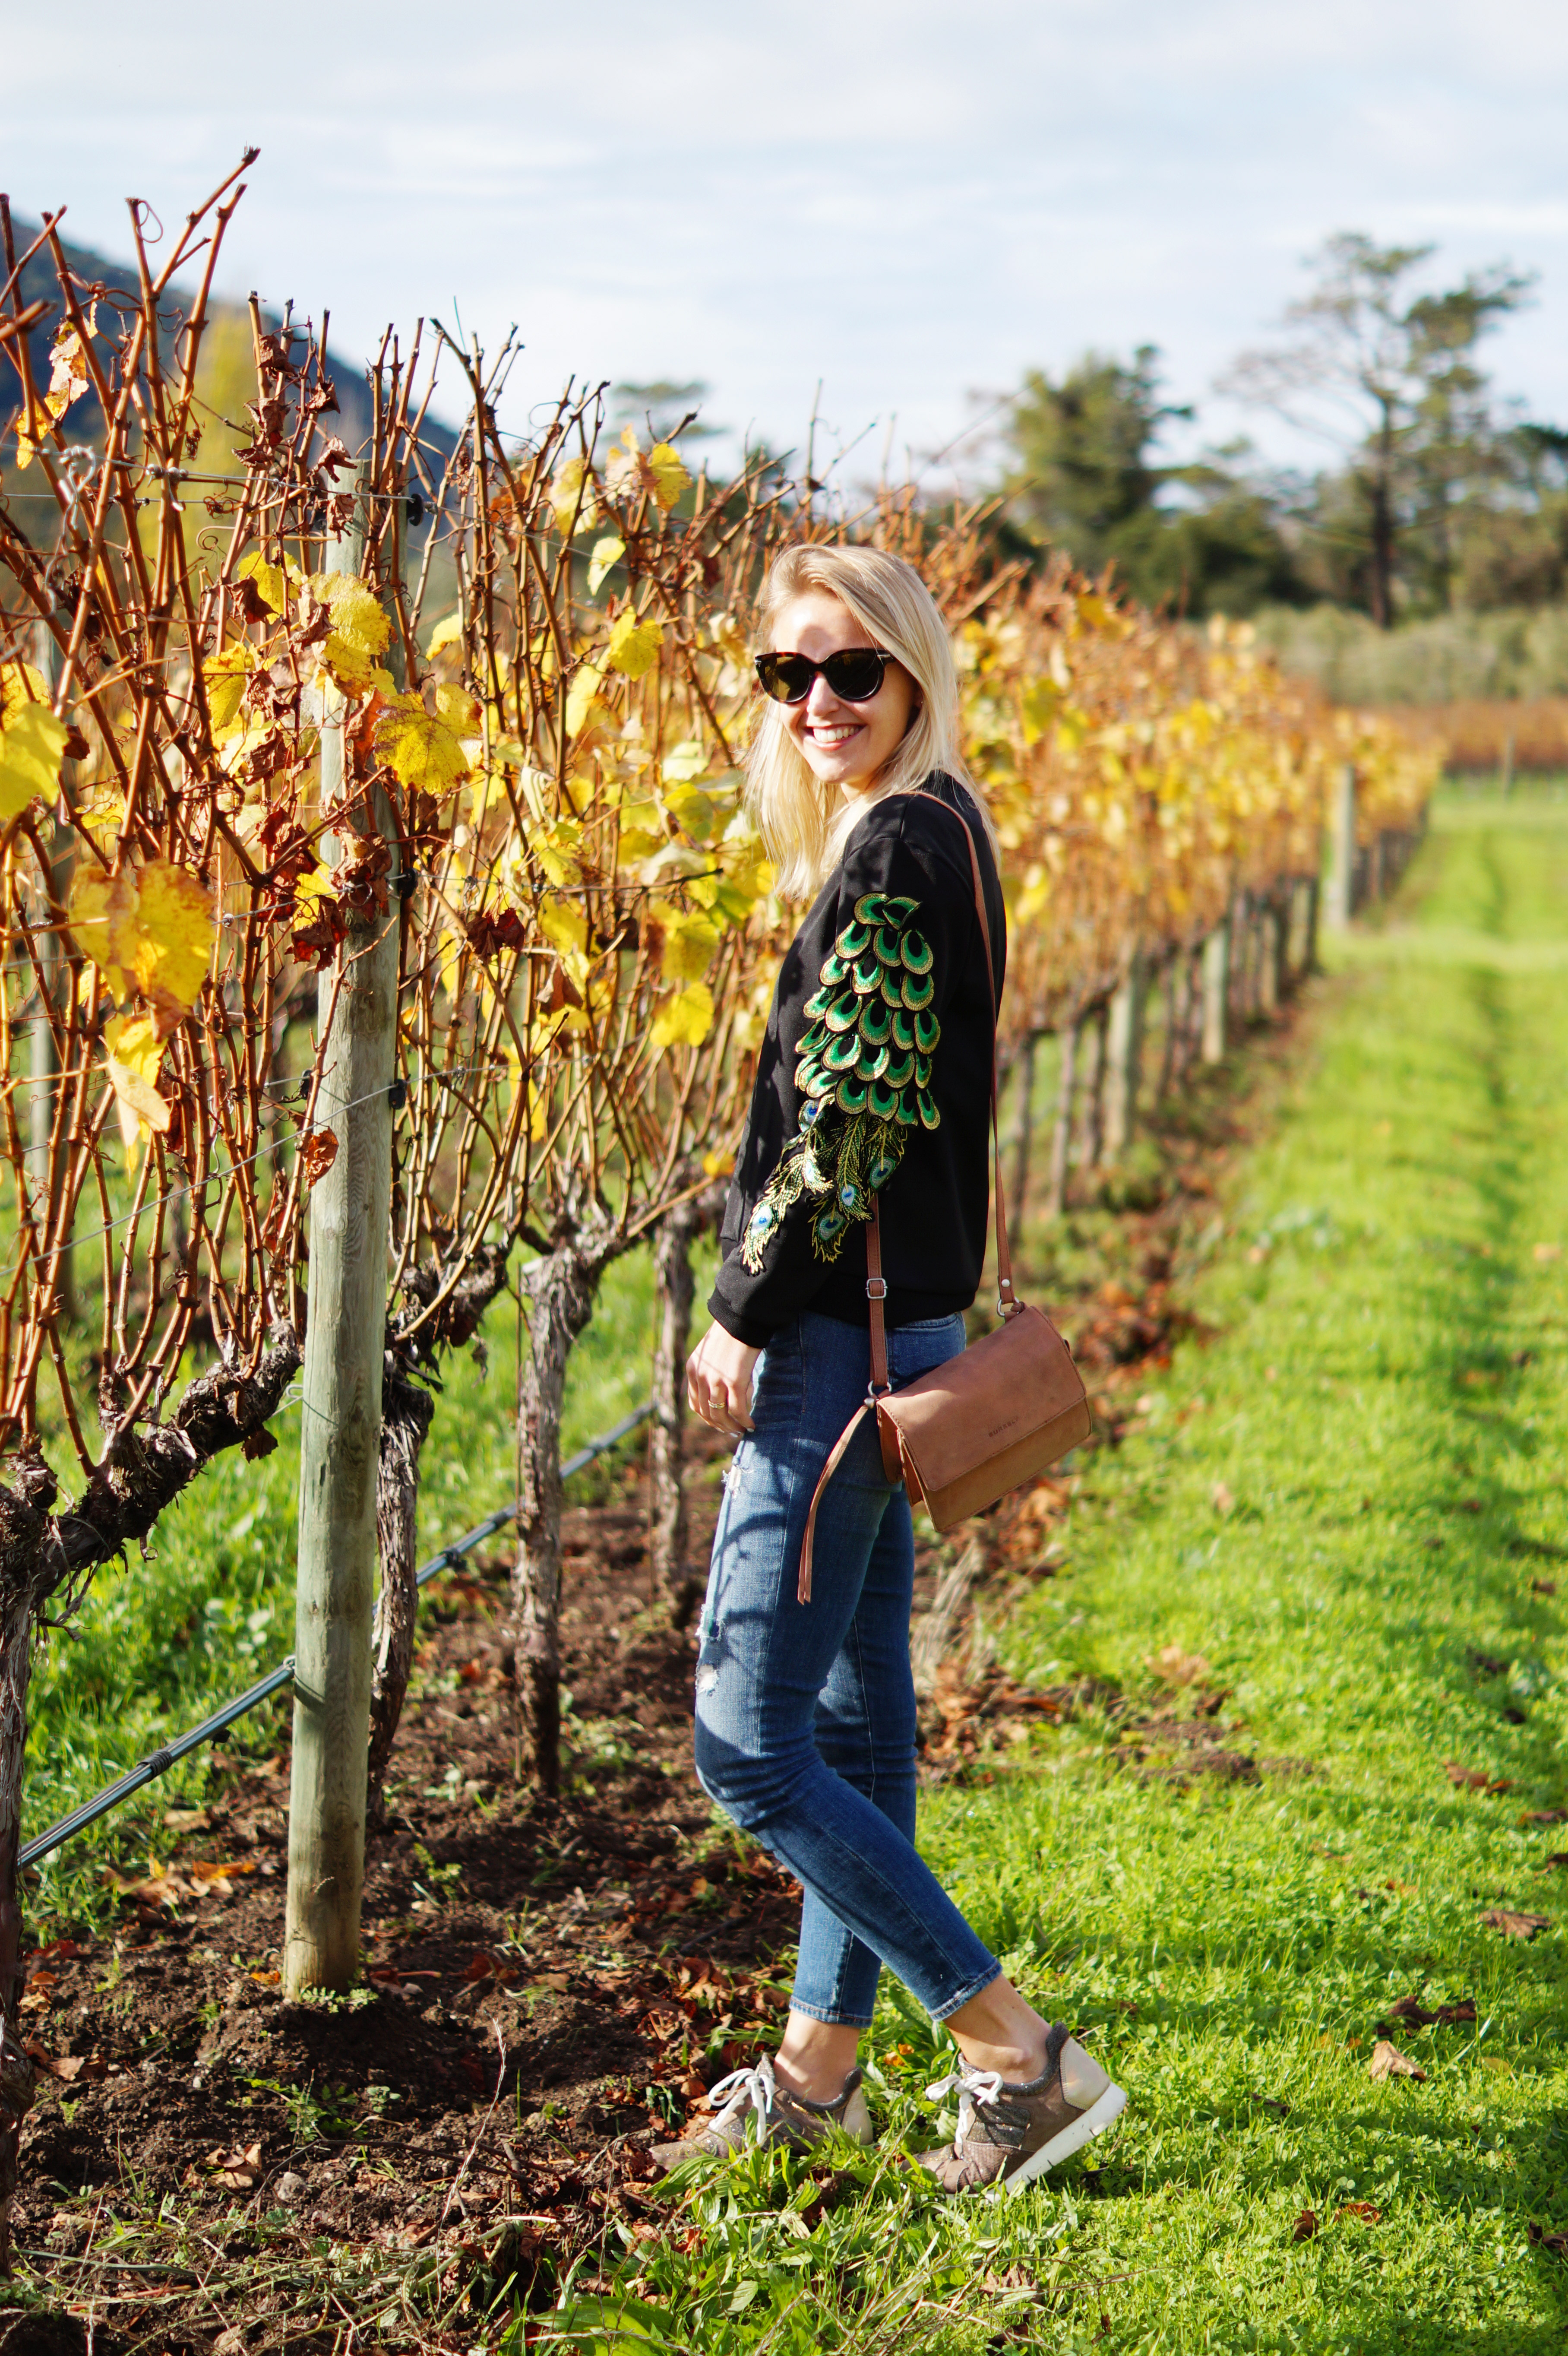 bag-at-you-fashion-blog-what-to-wear-when-wine-tasting